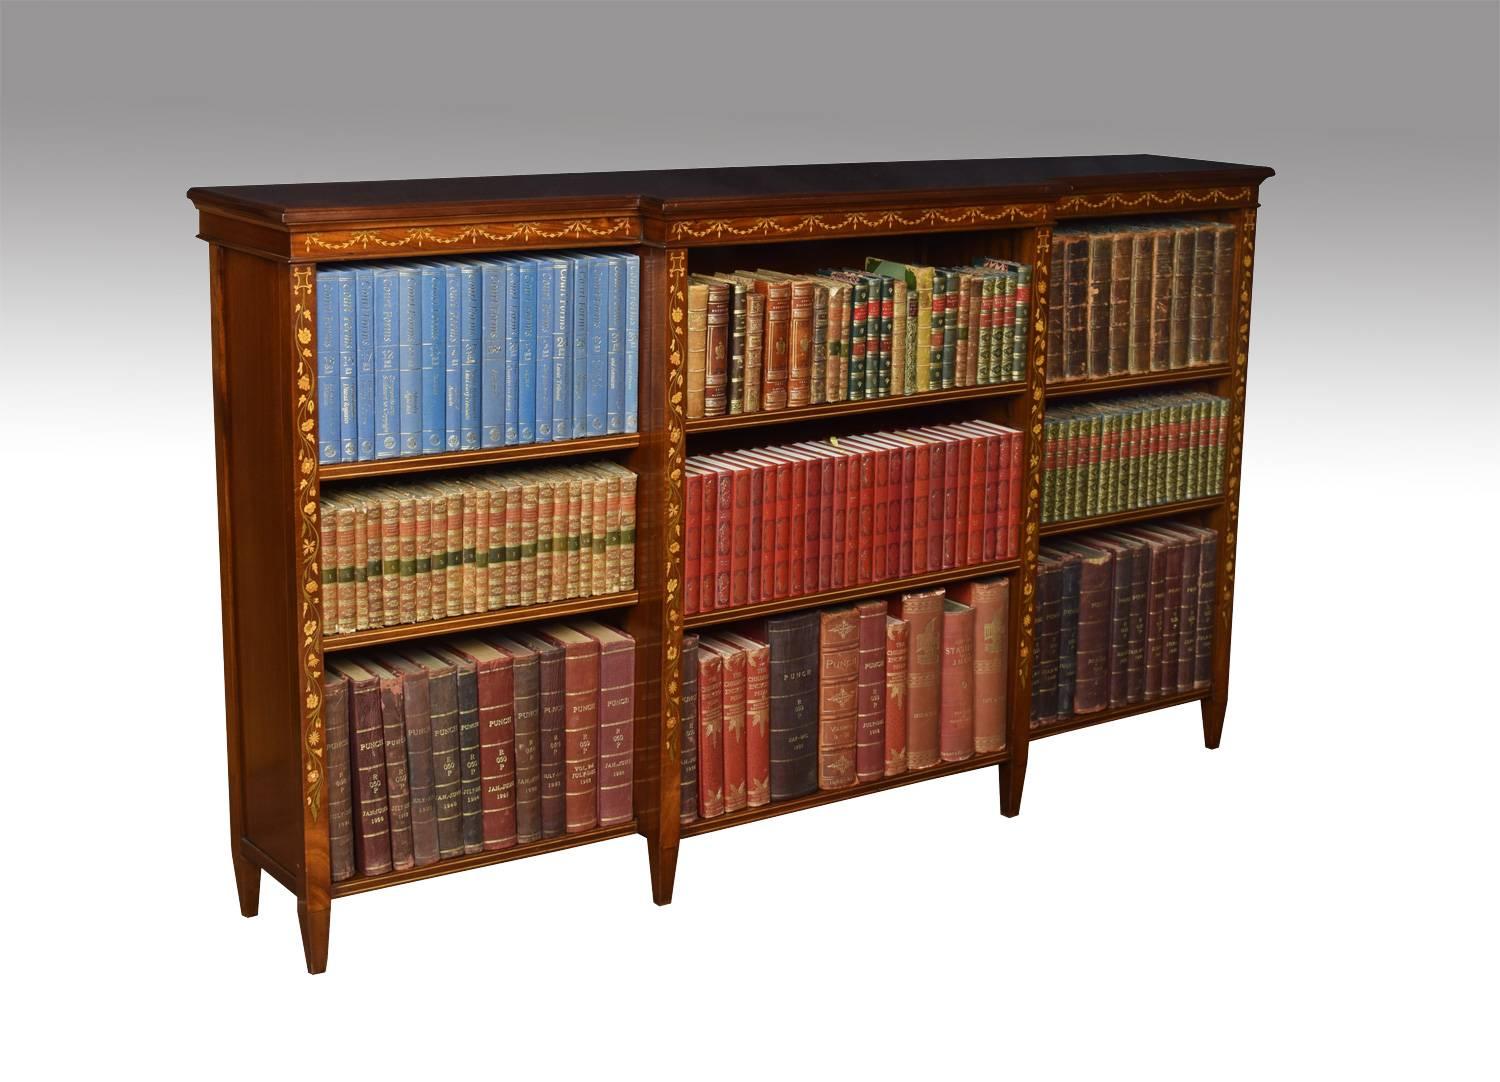 Edwardian mahogany and marquetry open bookcase, the large breakfront string inlaid top above three bays of adjustable shelves, each section having two shelves. Divided by floral marquetry inlaid columns. Terminating in tapered